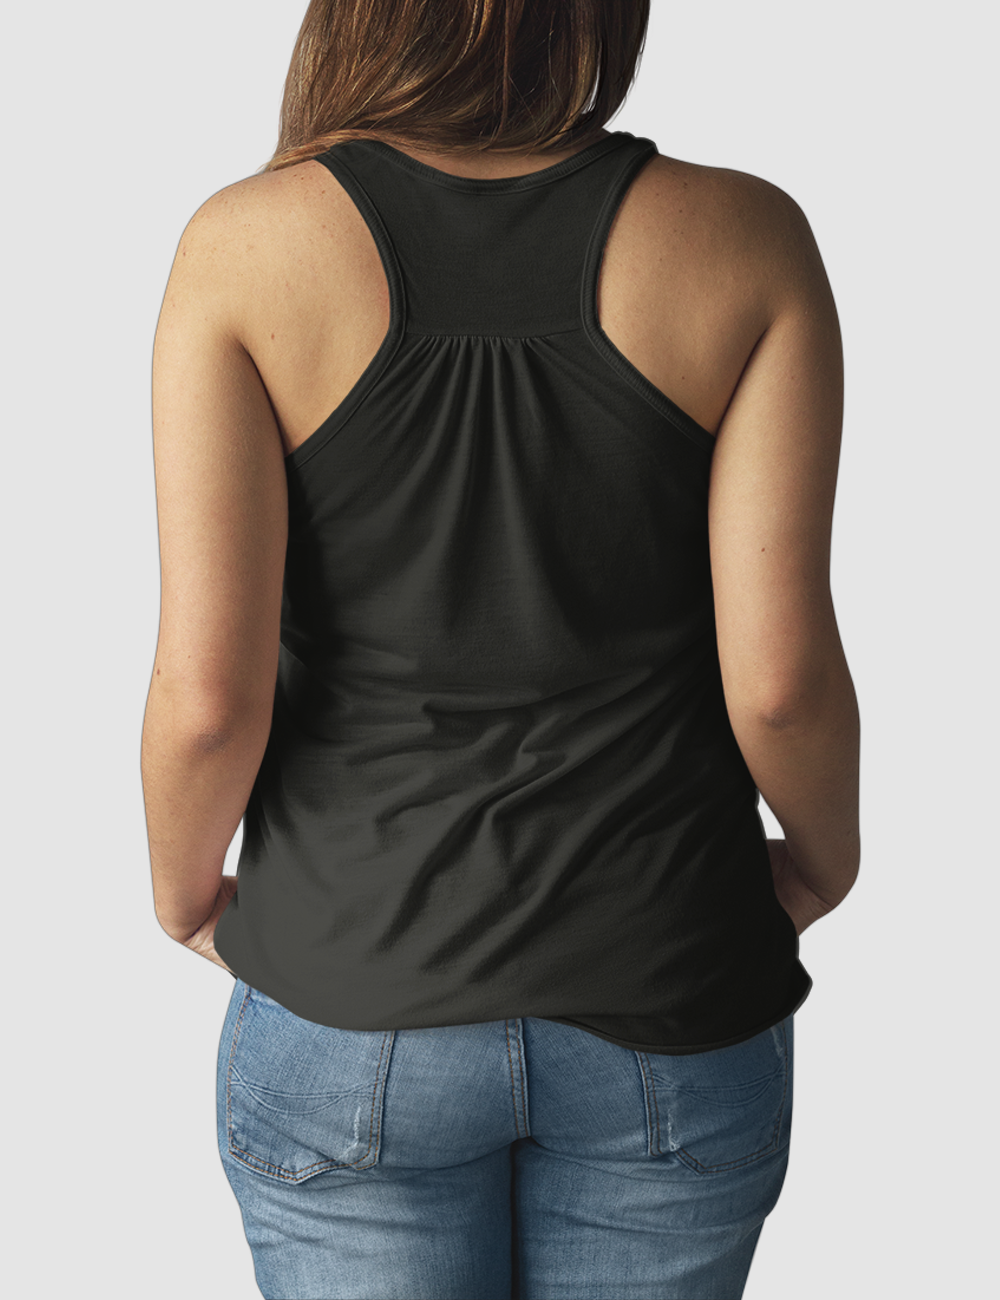 All I Want To See Is Green | Women's Cut Racerback Tank Top OniTakai